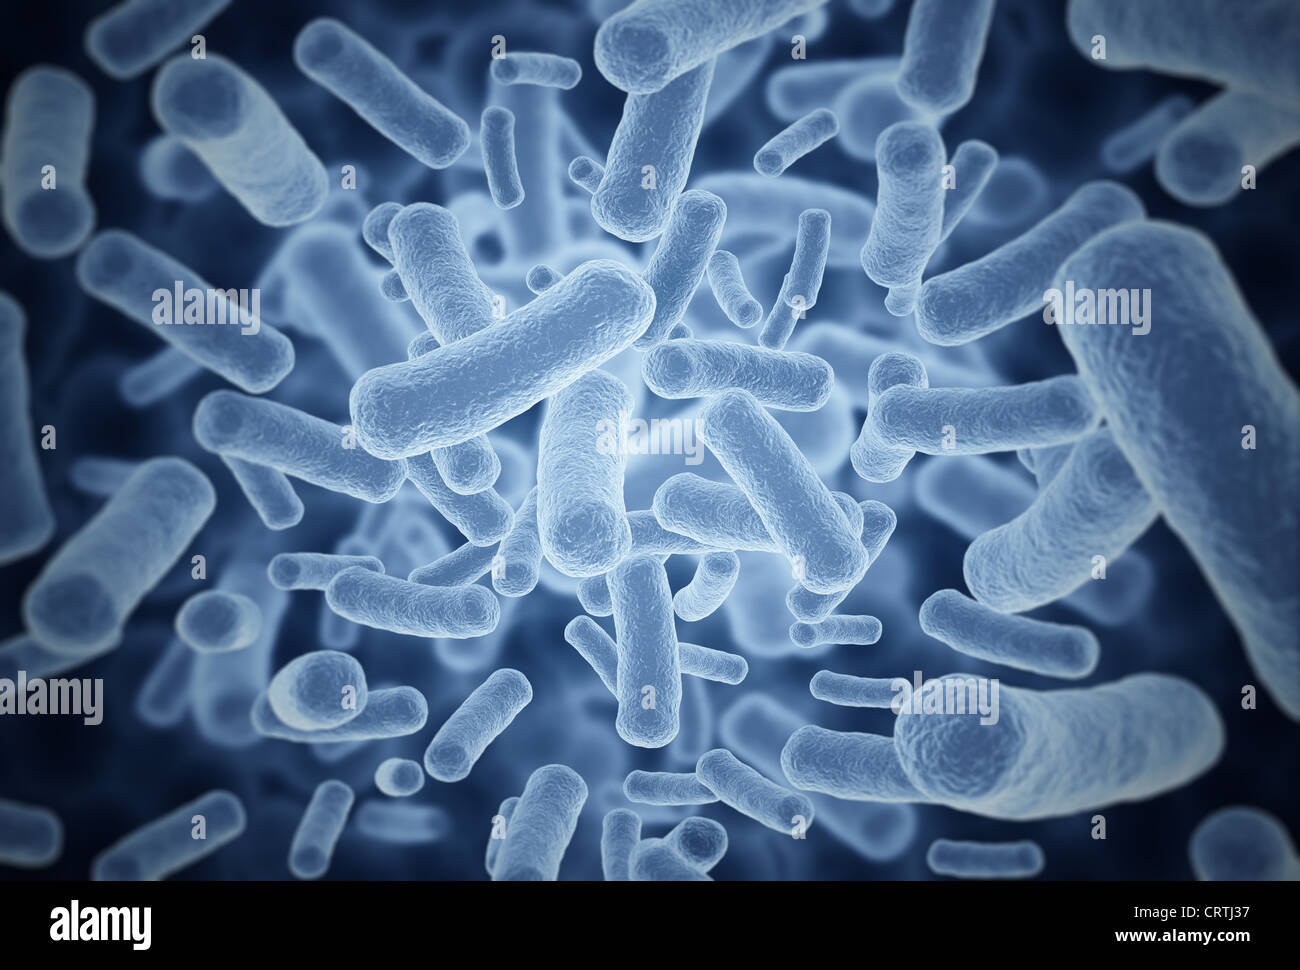 Large resolution image of virus bacteria cells Stock Photo